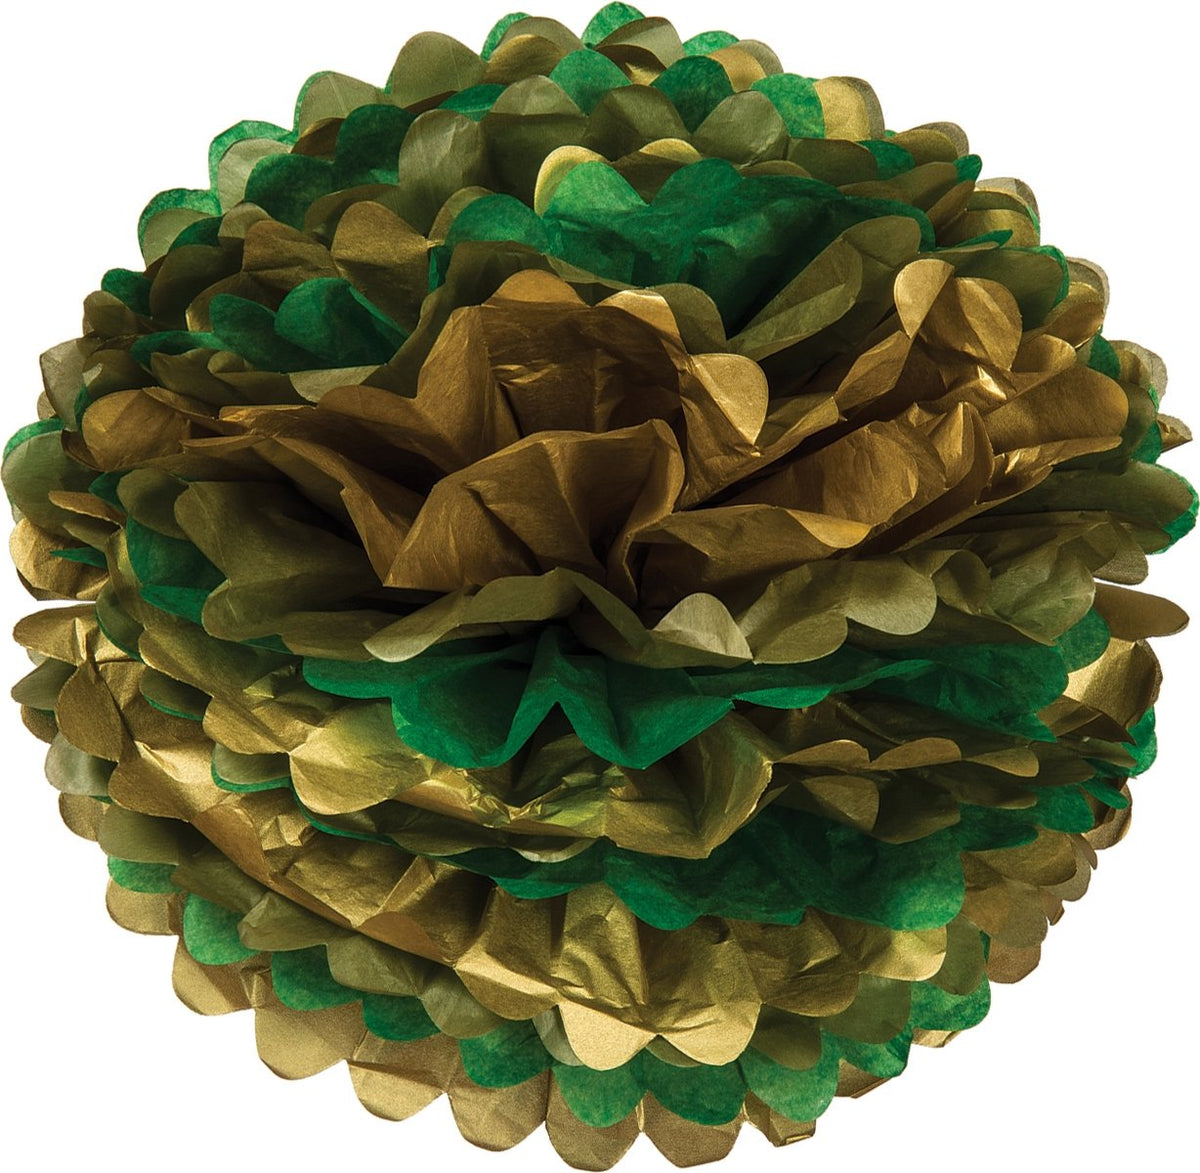 Mixed Greens with Gold Tissue Paper Flower Pom Pom 15 inch - PaperLanternStore.com - Paper Lanterns, Decor, Party Lights &amp; More